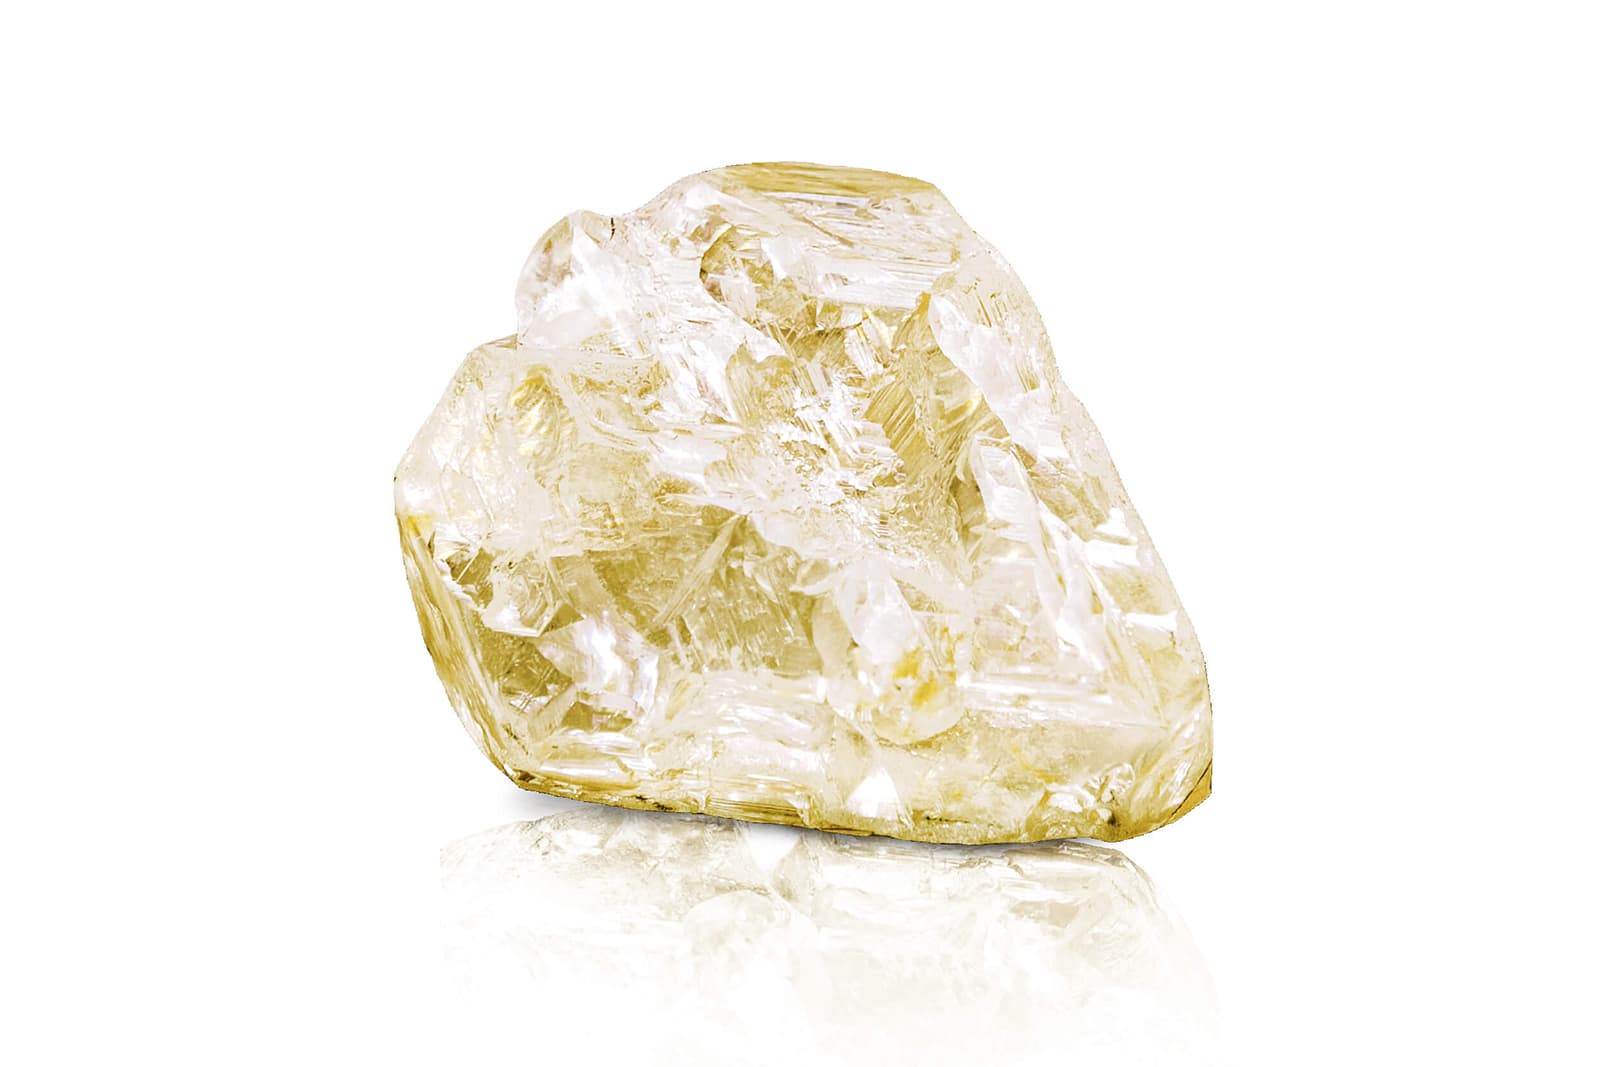 The 709-carat Peace Diamond was discovered by a team of artisanal diggers in Sierra Leone